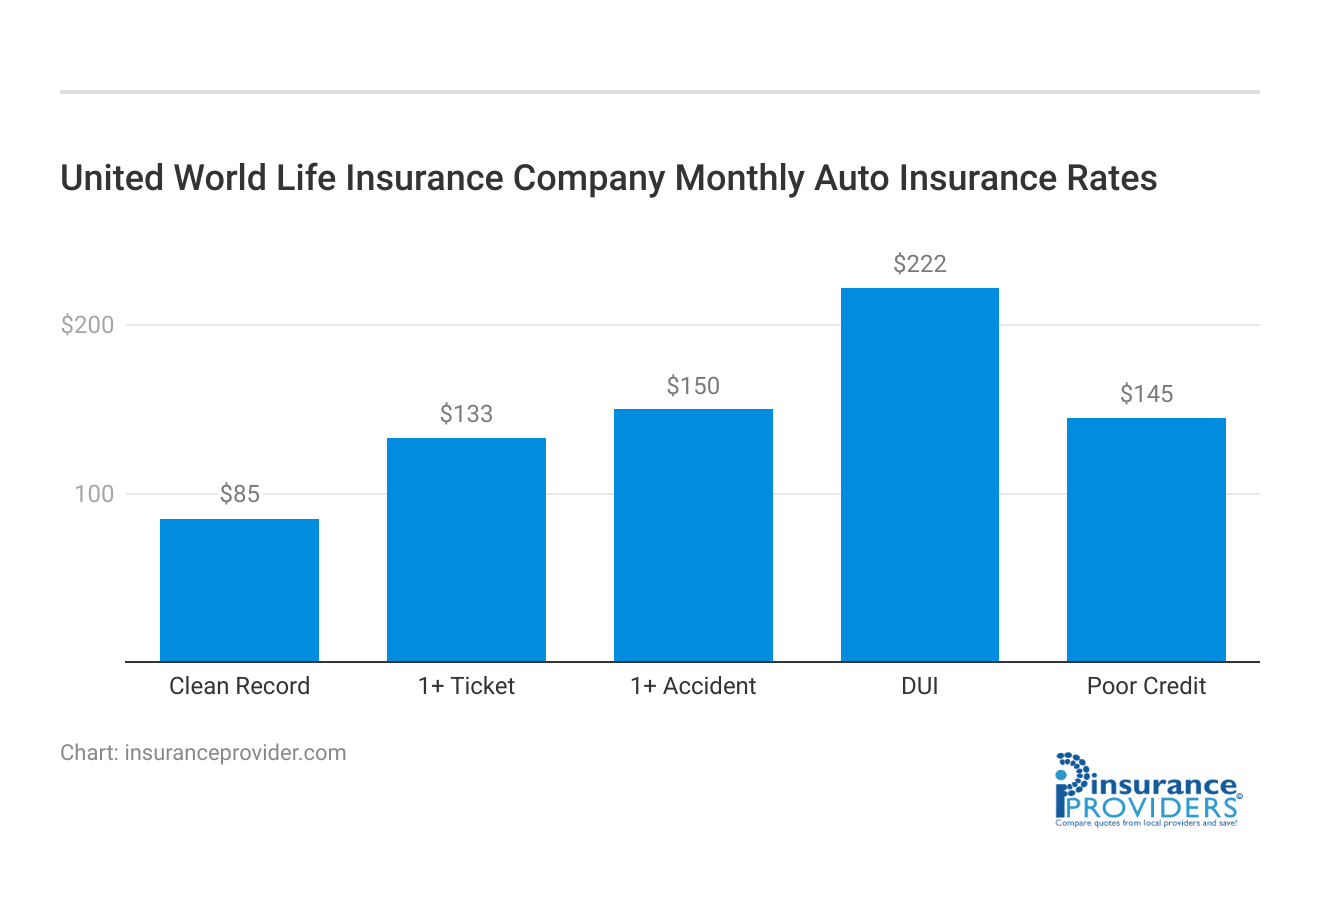 <h3>United World Life Insurance Company Monthly Auto Insurance Rates</h3>